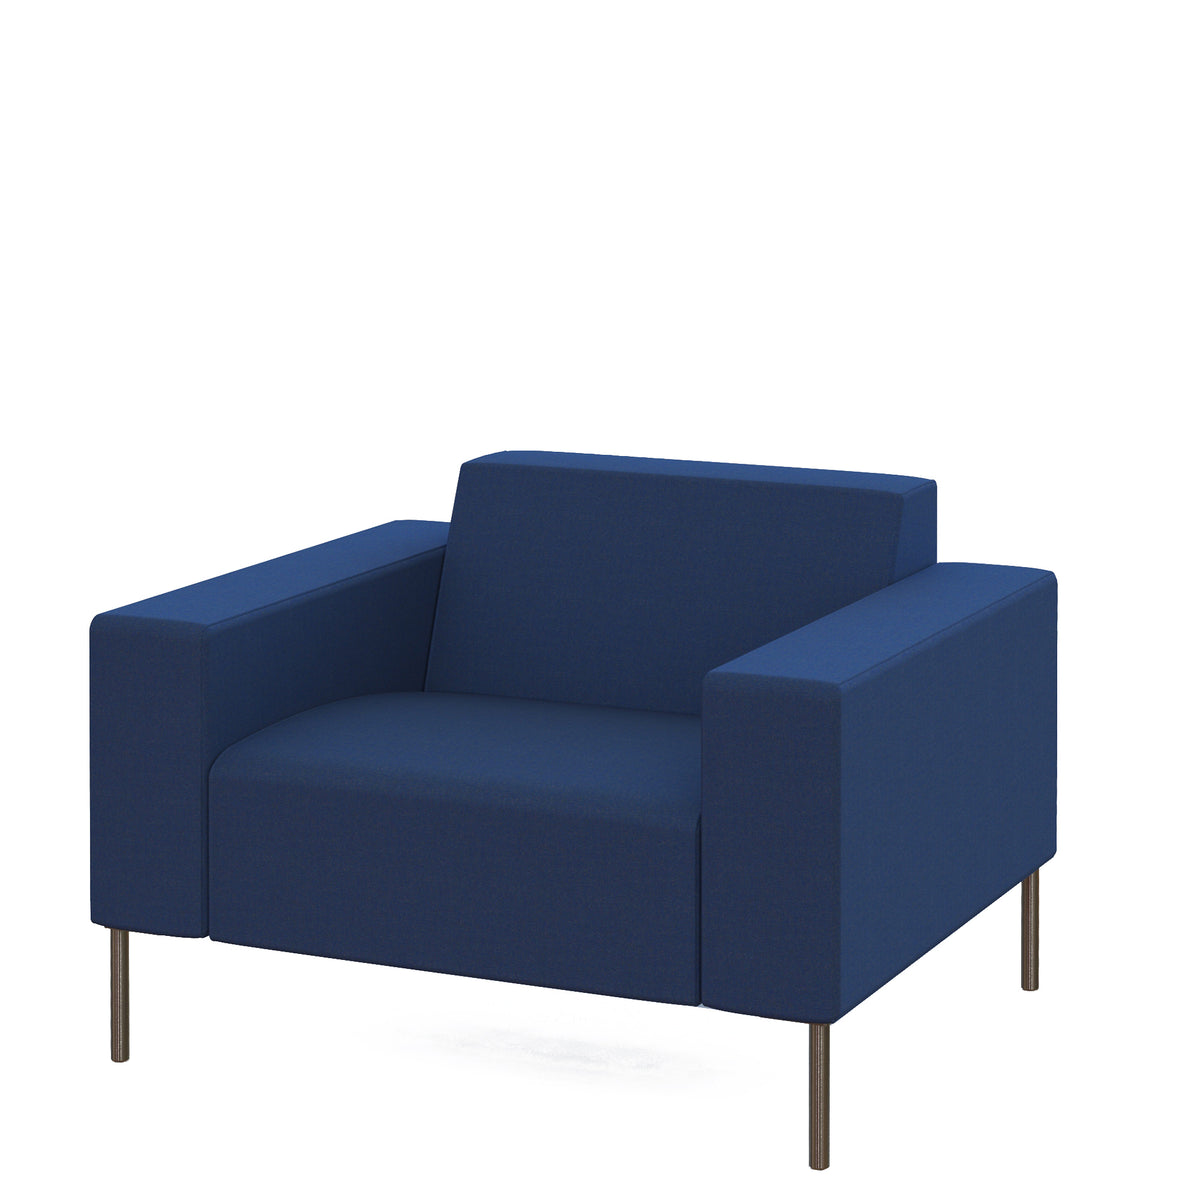 Hitch Mylius HM18 Origin Armchair Brushed Stainless Steel Legs Leyton Holborn